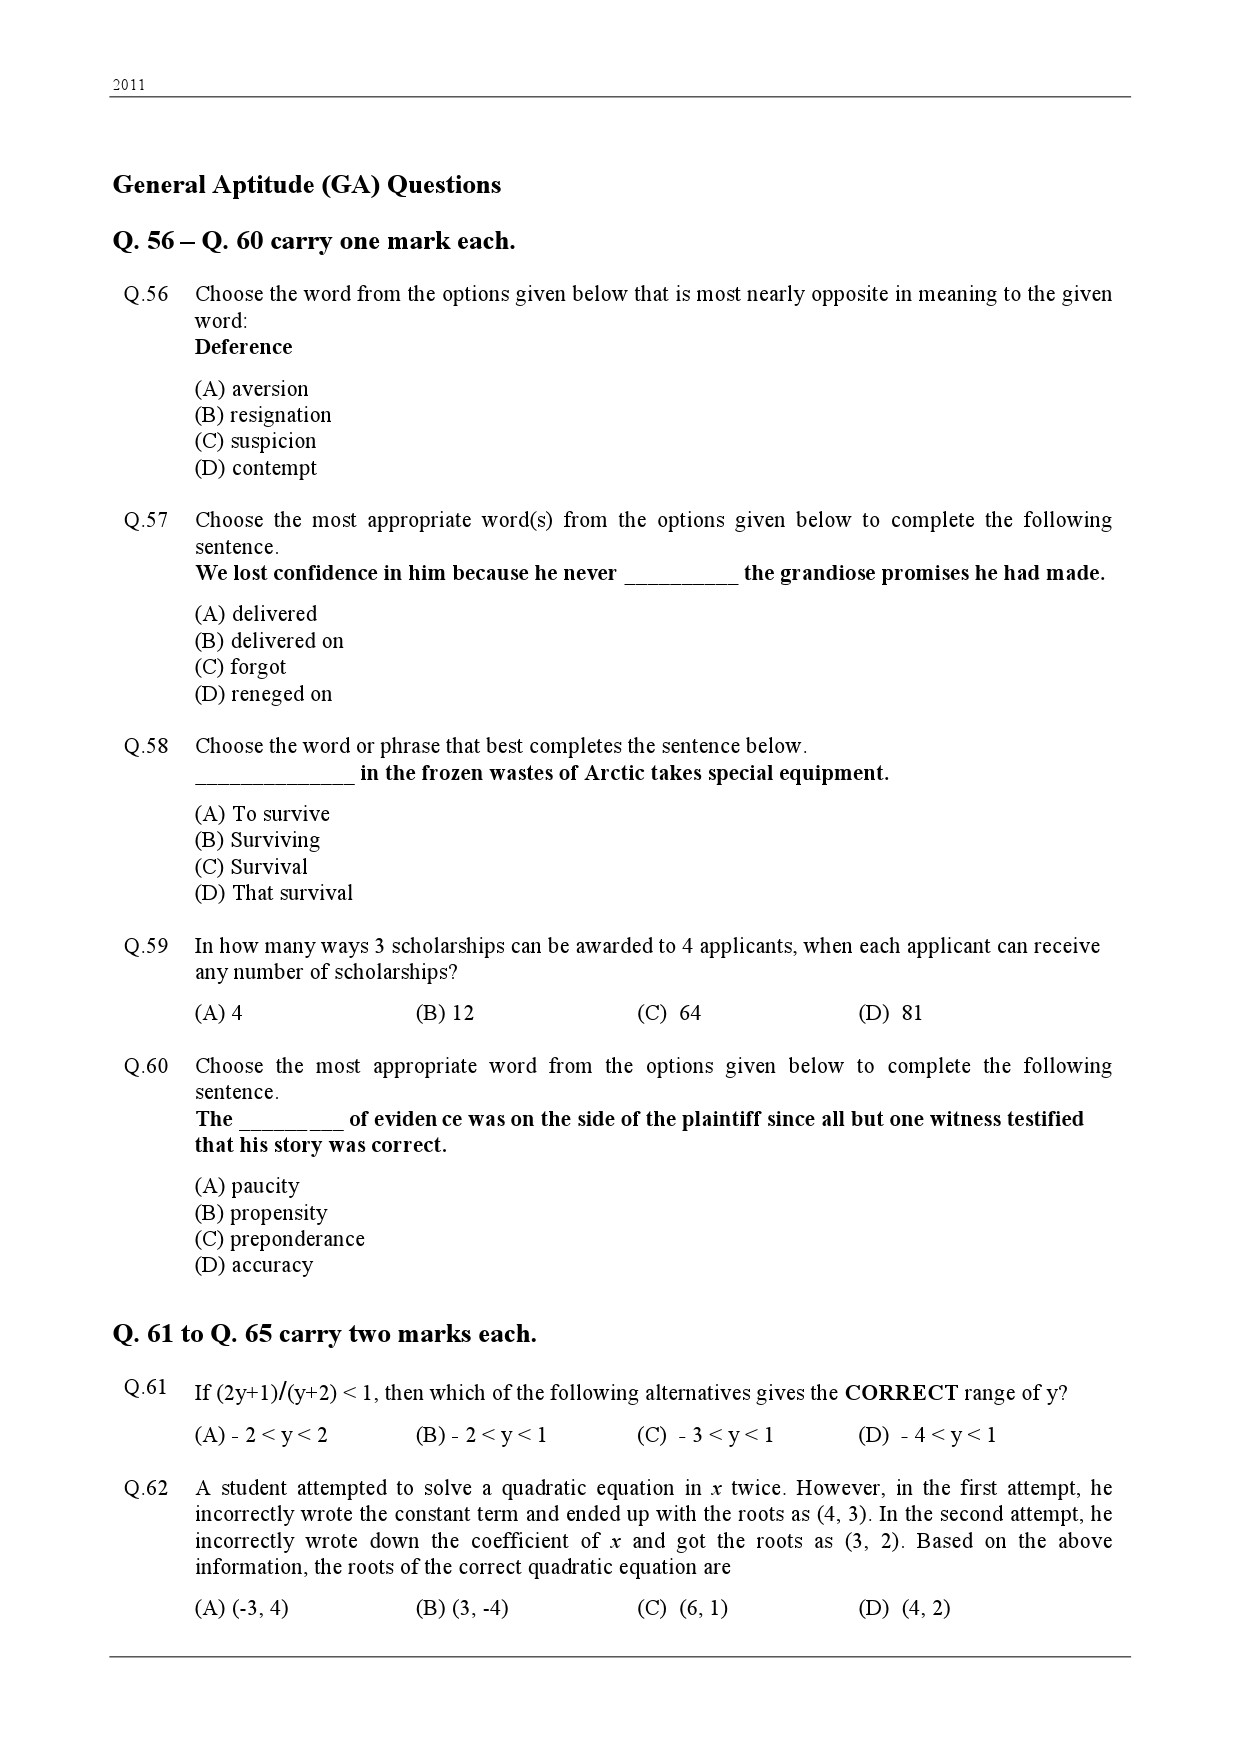 GATE Exam Question Paper 2011 Mining Engineering 11